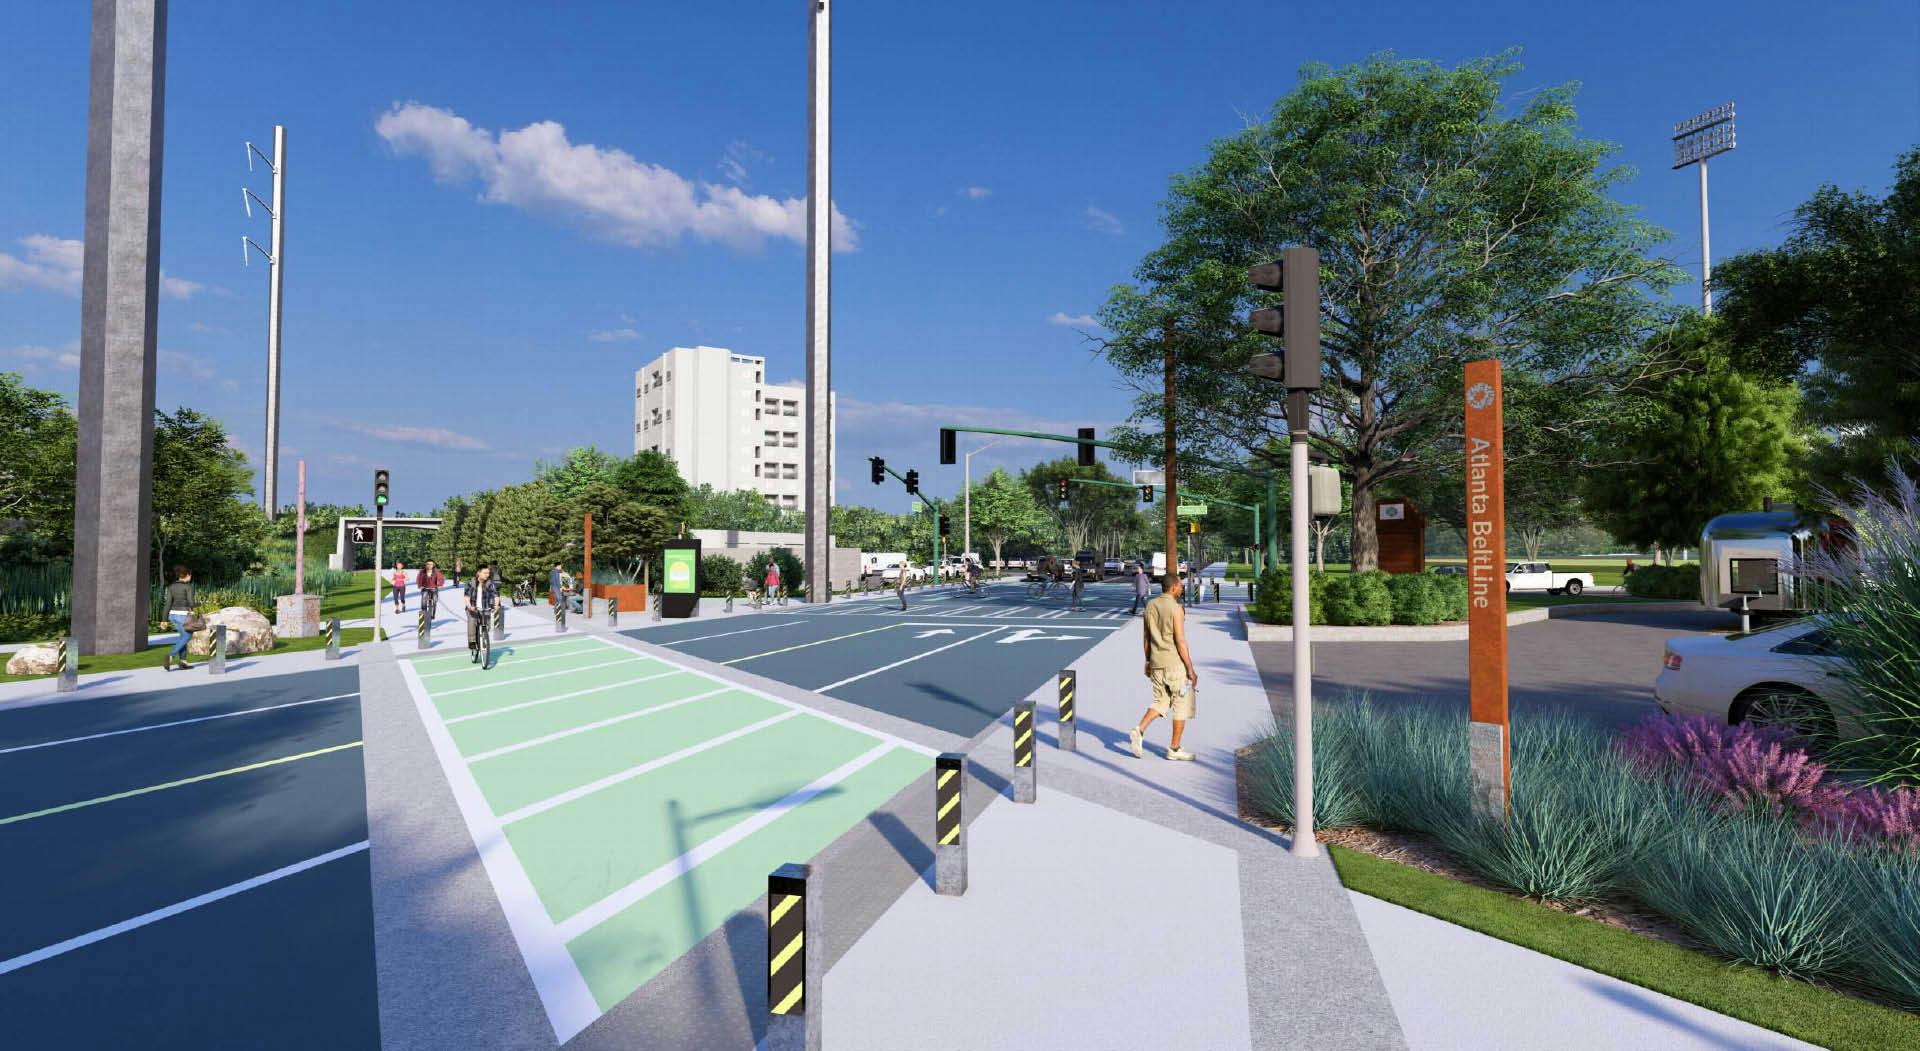 Rendering of the intersection of the Beltline, 10th Street, and Monroe Drive looking southeast.